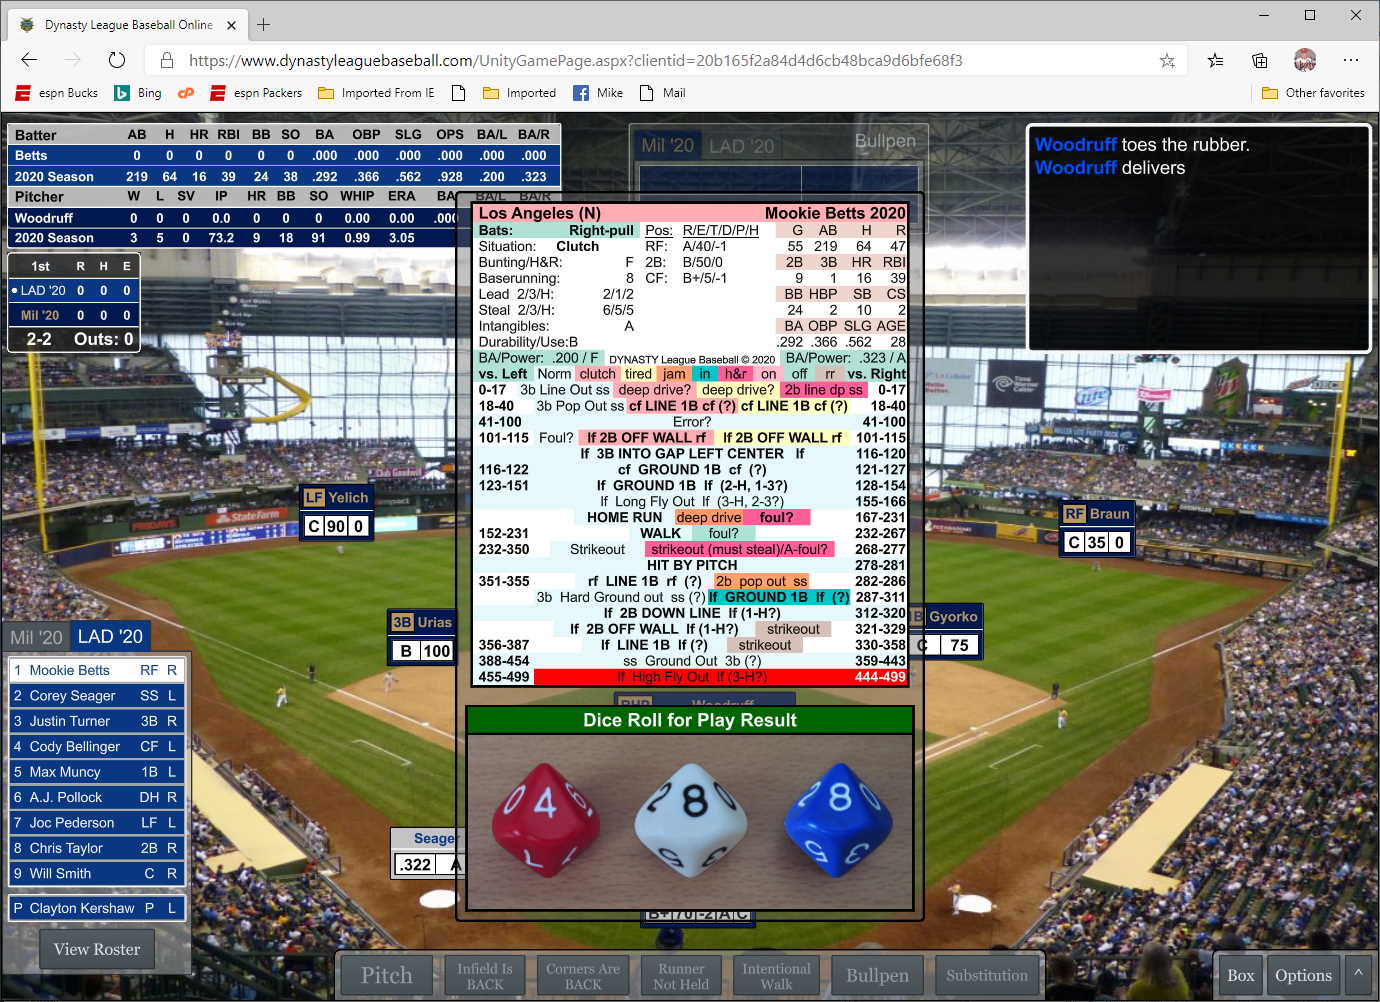 NEW! Preview of the 2020 DYNASTY League Baseball Powered by Pursue the Pennant Season Player Cards DYNASTY League Baseball Powered By Pursue the Pennant